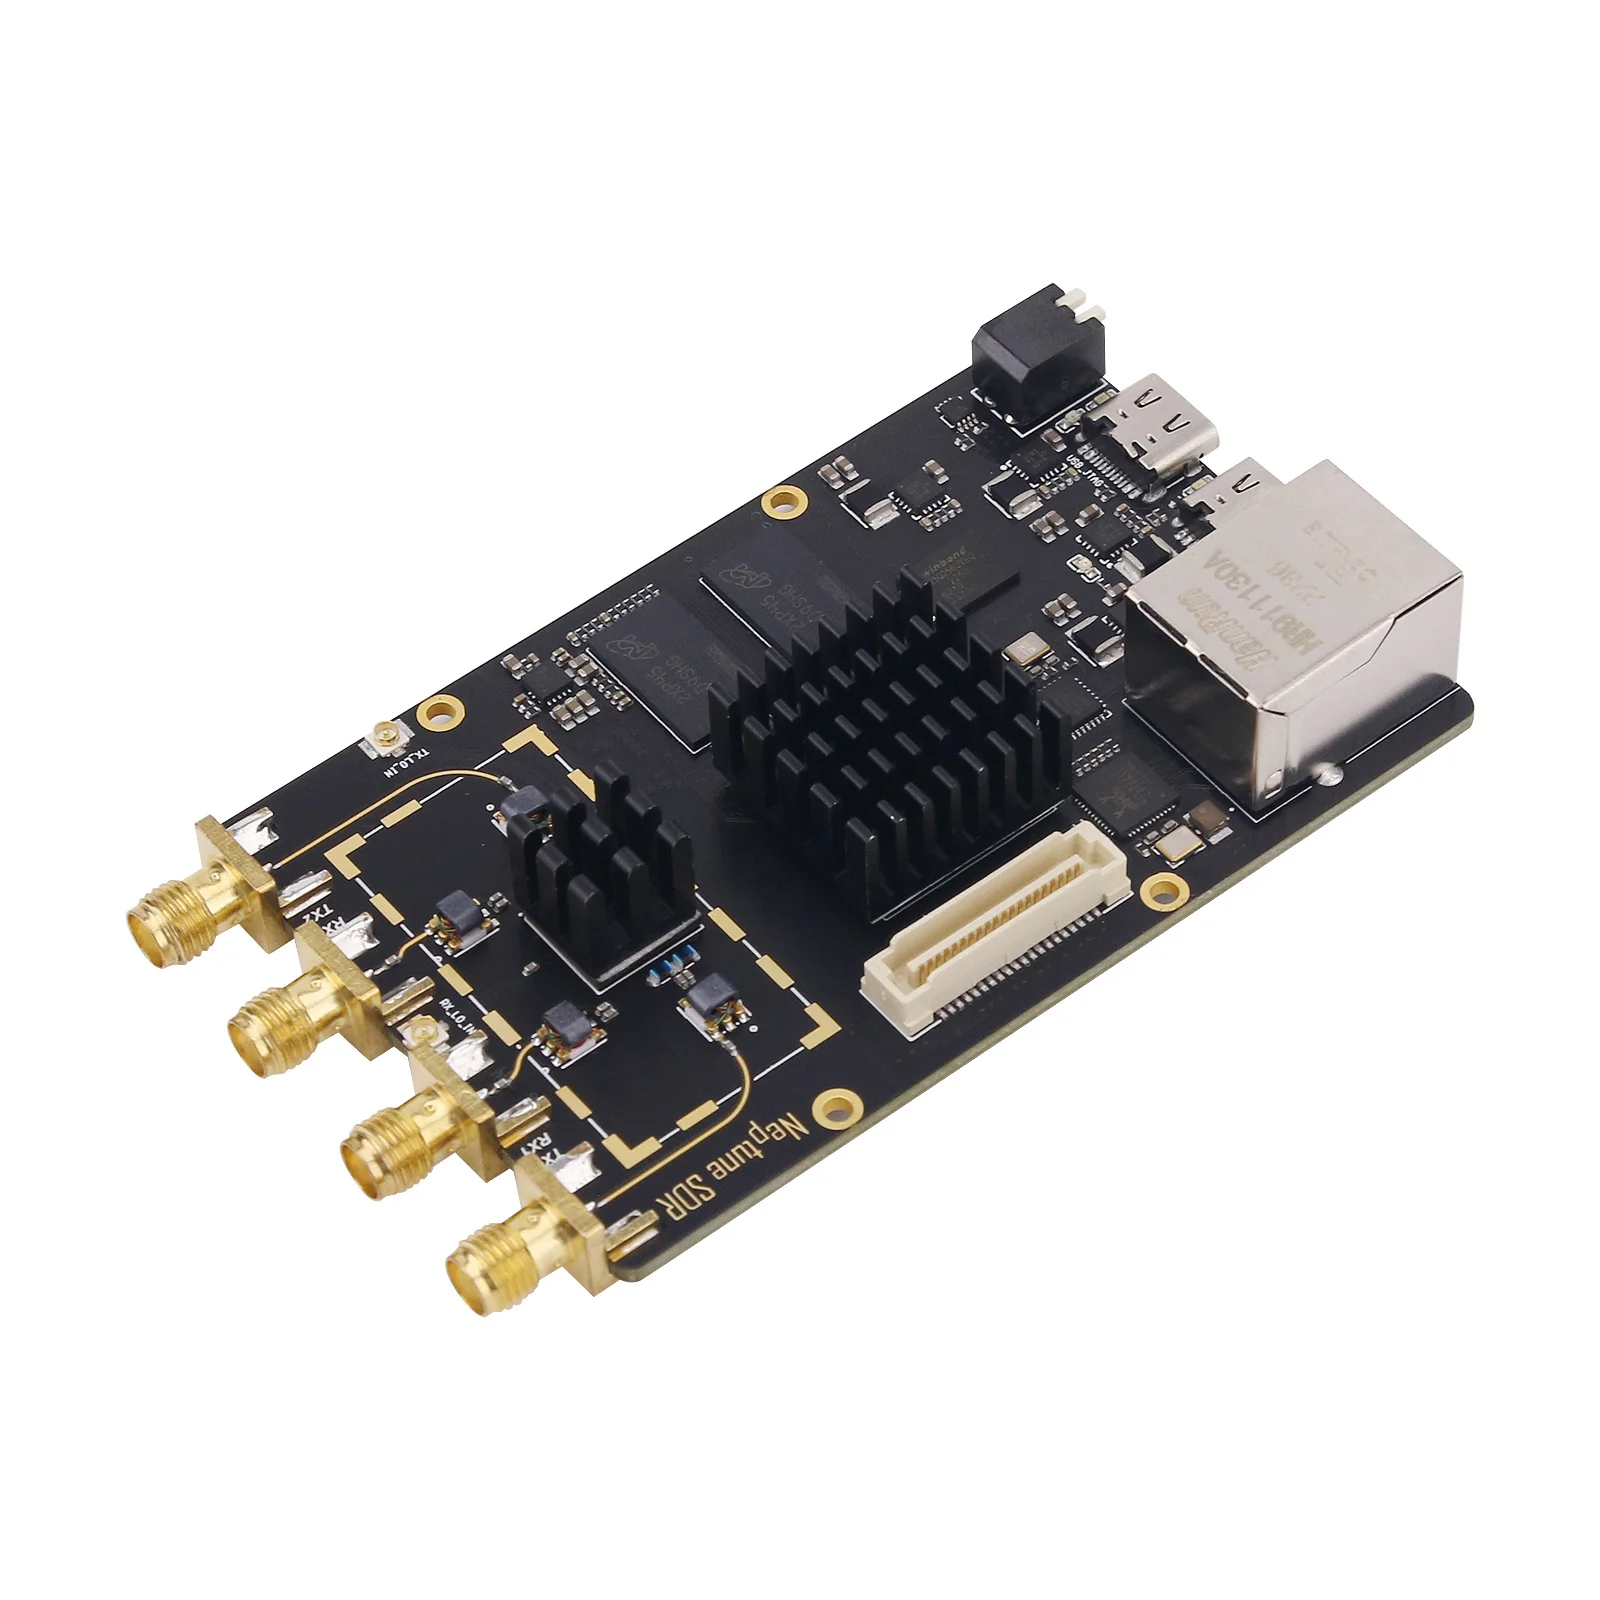 

NeptuneSDR B210 Plus 70MHz-6GHz Openwifi Pluto SDR AD9361 Chip SDR Development Board for ZYNQ